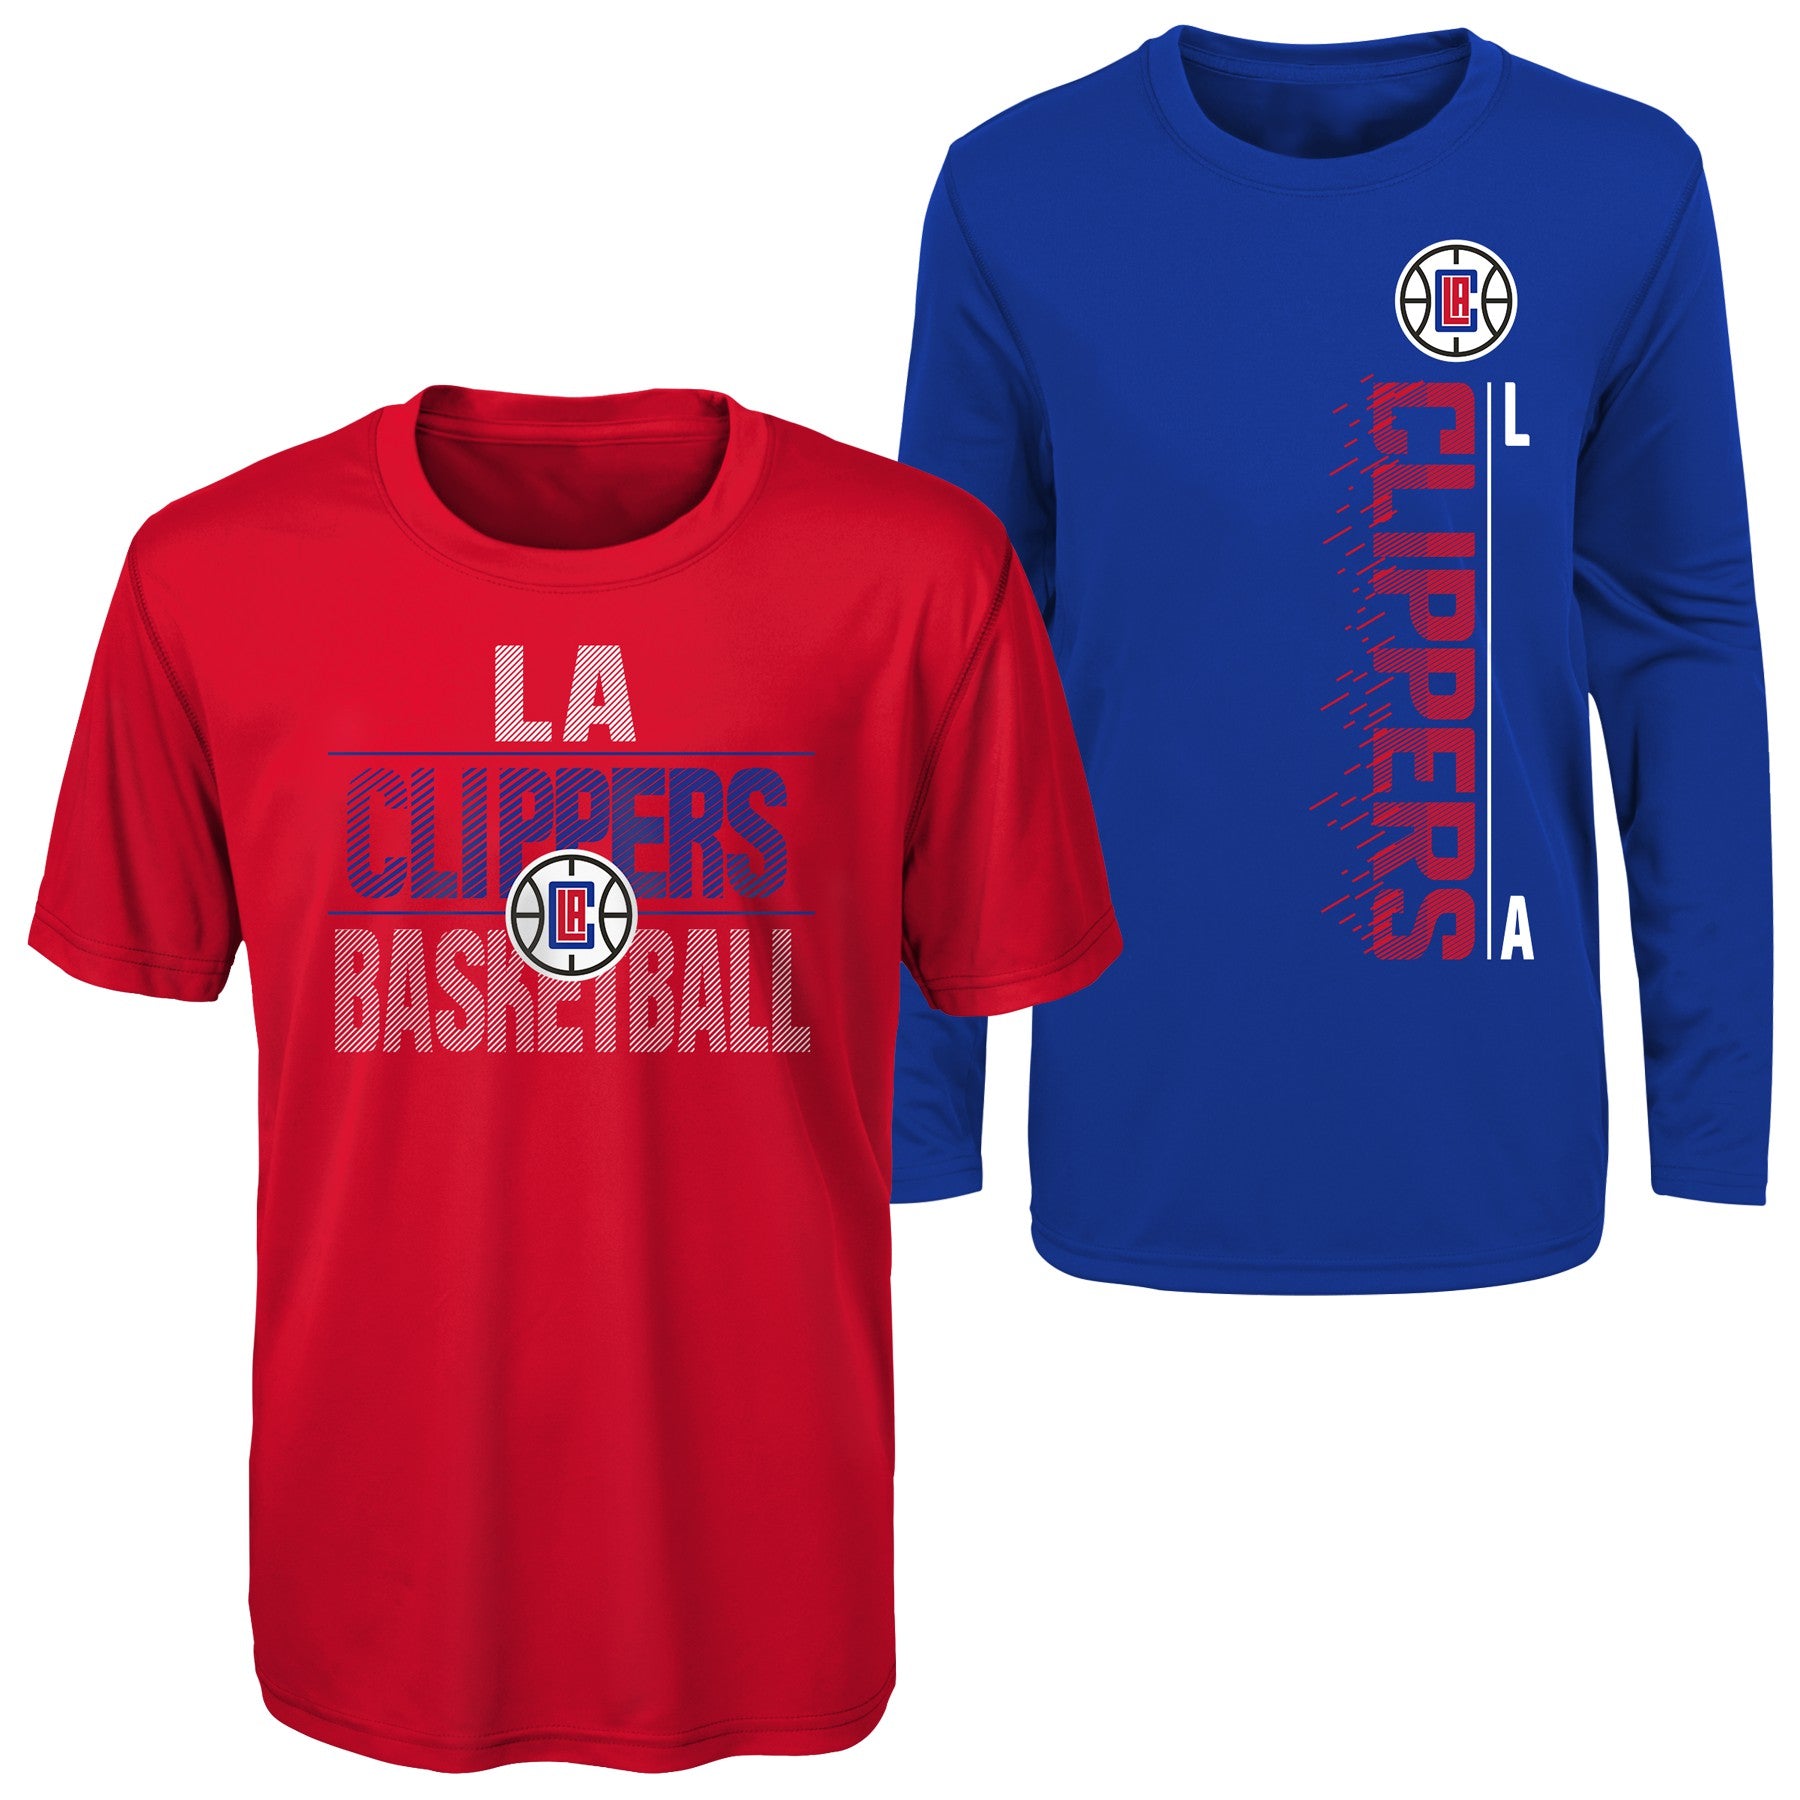 Outerstuff NBA Youth (8-20) Los Angeles Clippers Performance Long